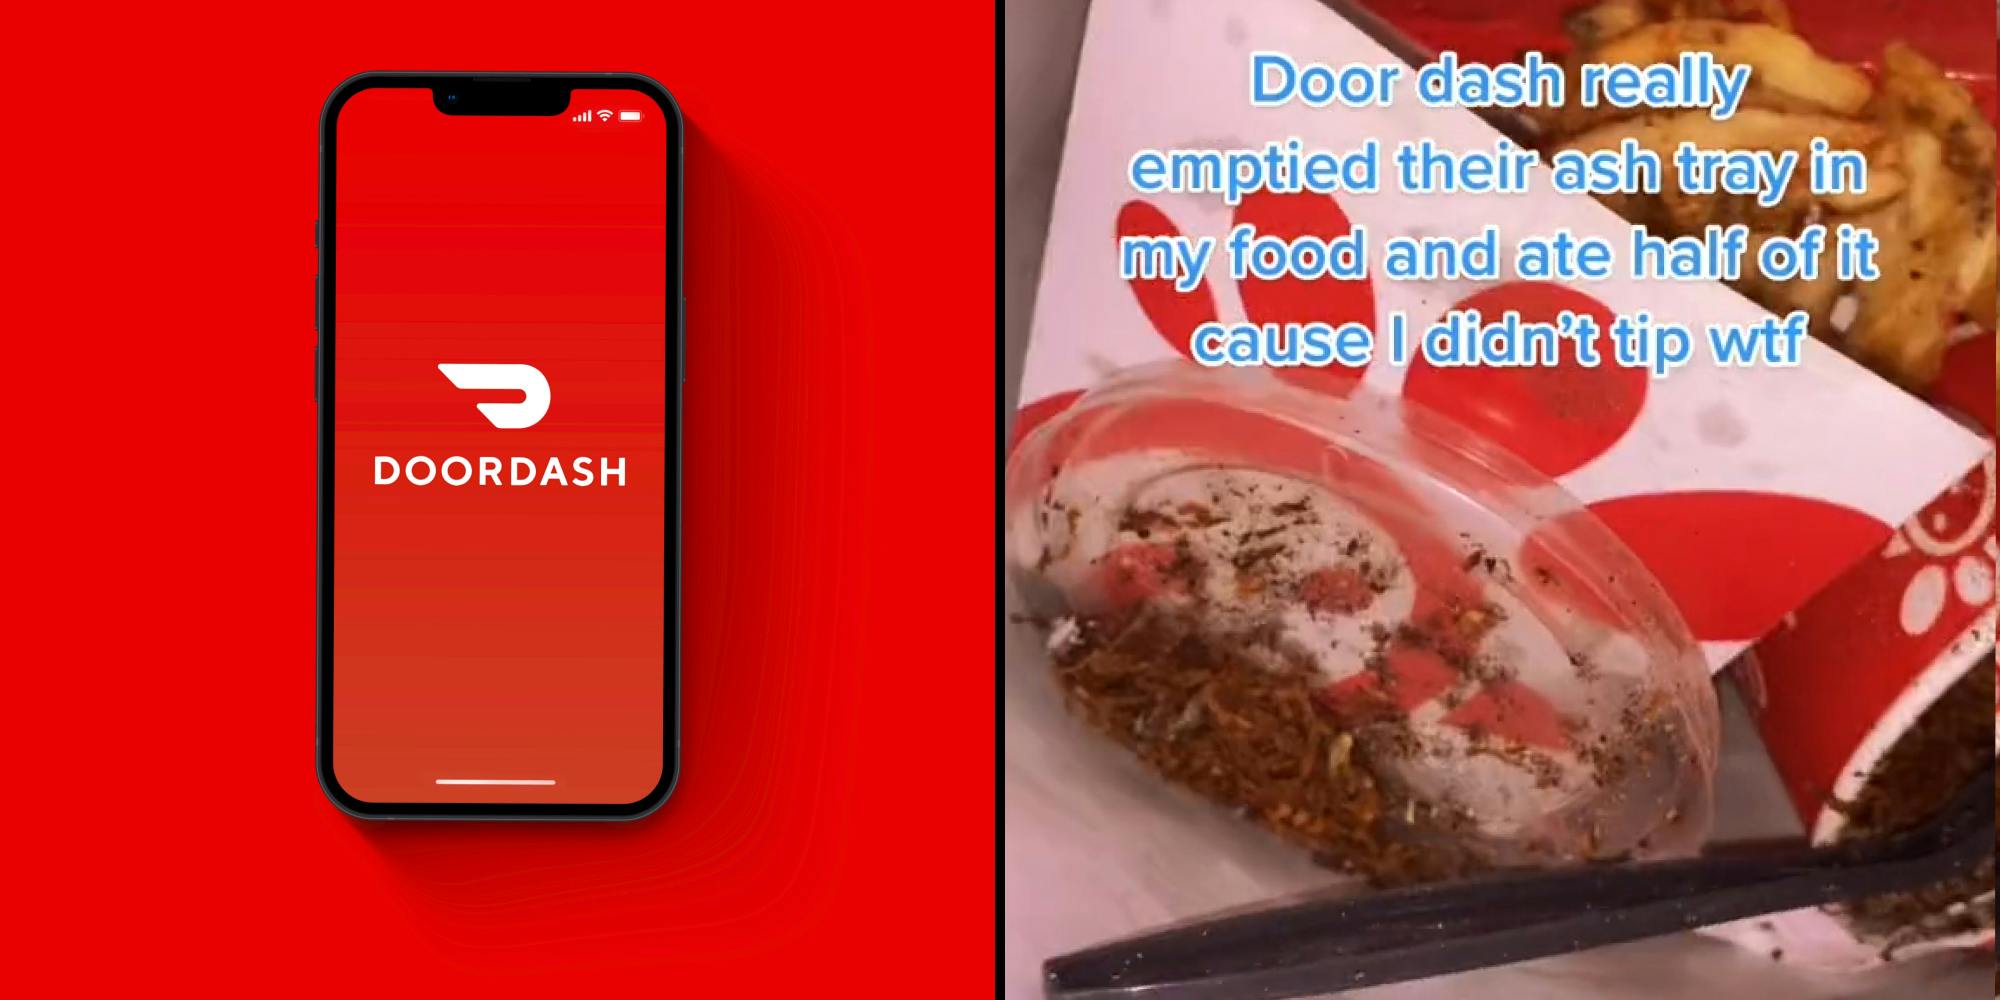 doordash logo on phone on red background (l) Chick-Fil-A food seen with ashes all over them in bag caption " Door dash really emptied their ash tray in my food and ate half of it cause I didn't tip wtf" (r)